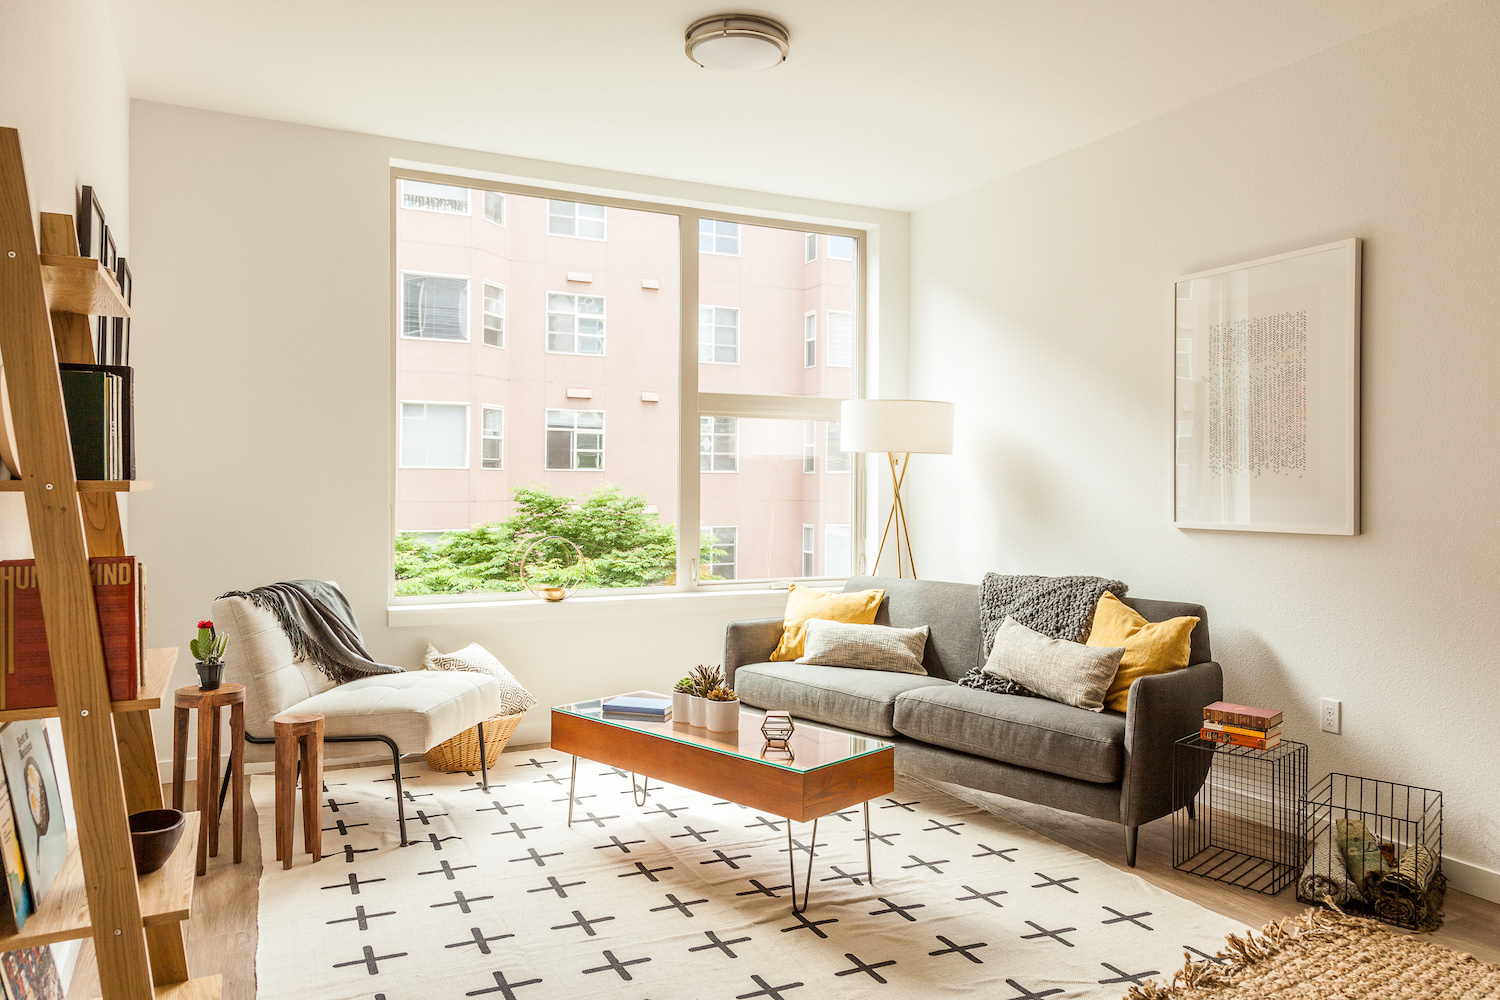 inside the living room of modern apartment building designs